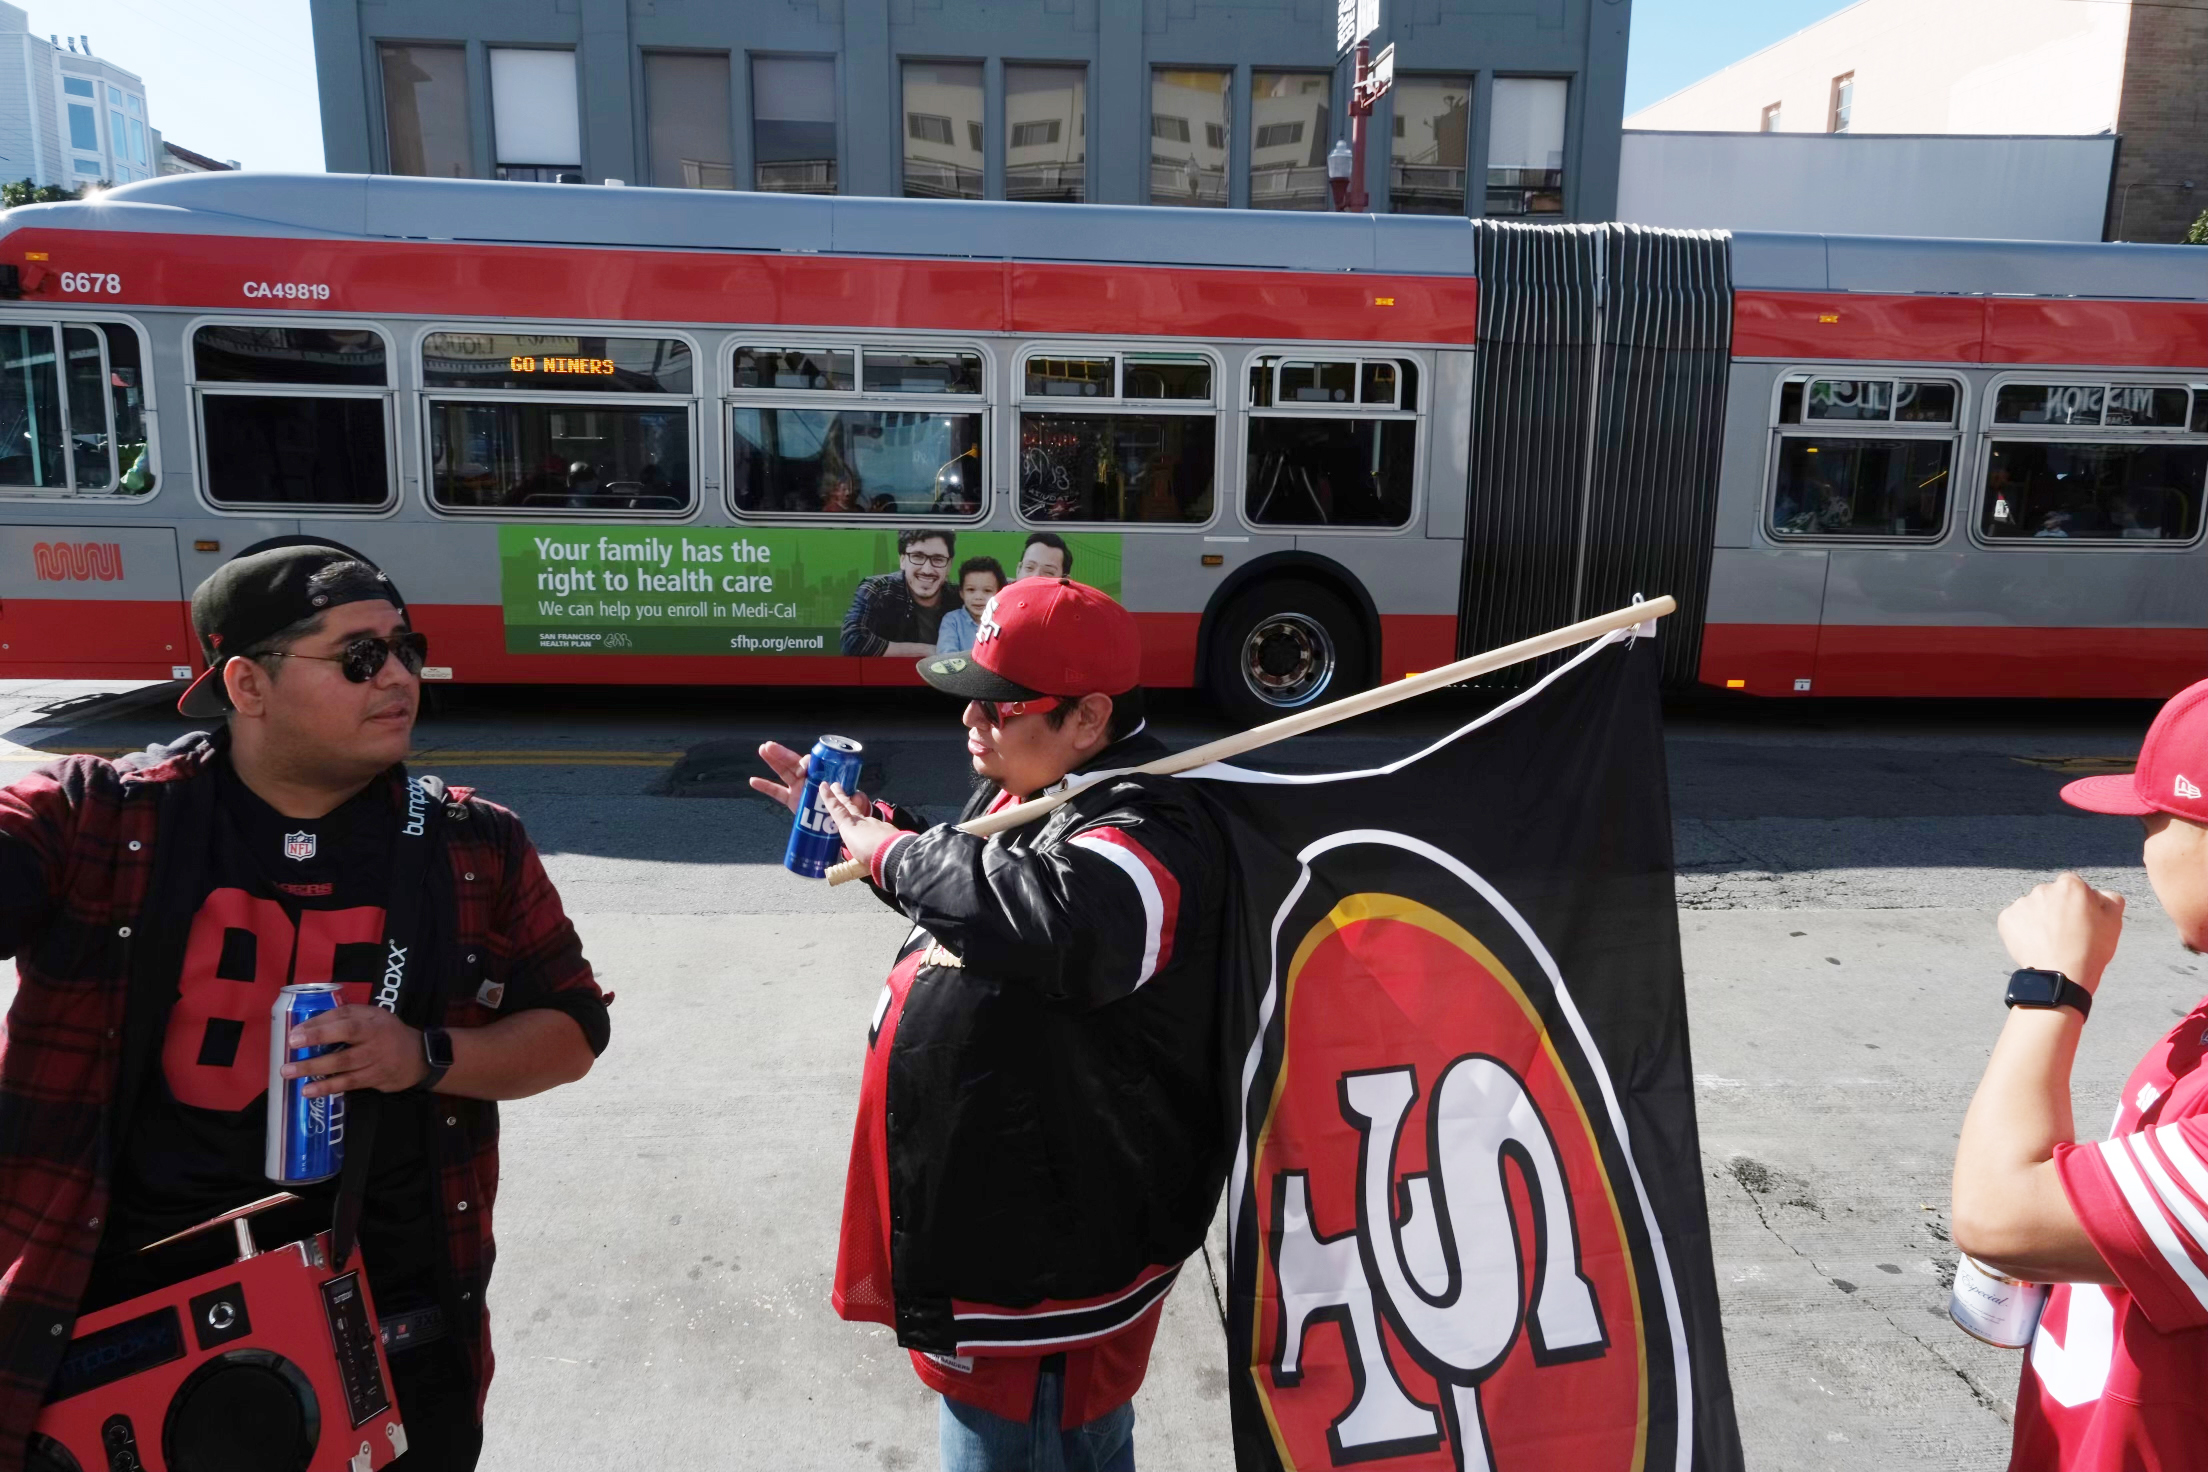 Three 49ers fans in jerseys on a street, one holding a flag, with a red bus behind them.